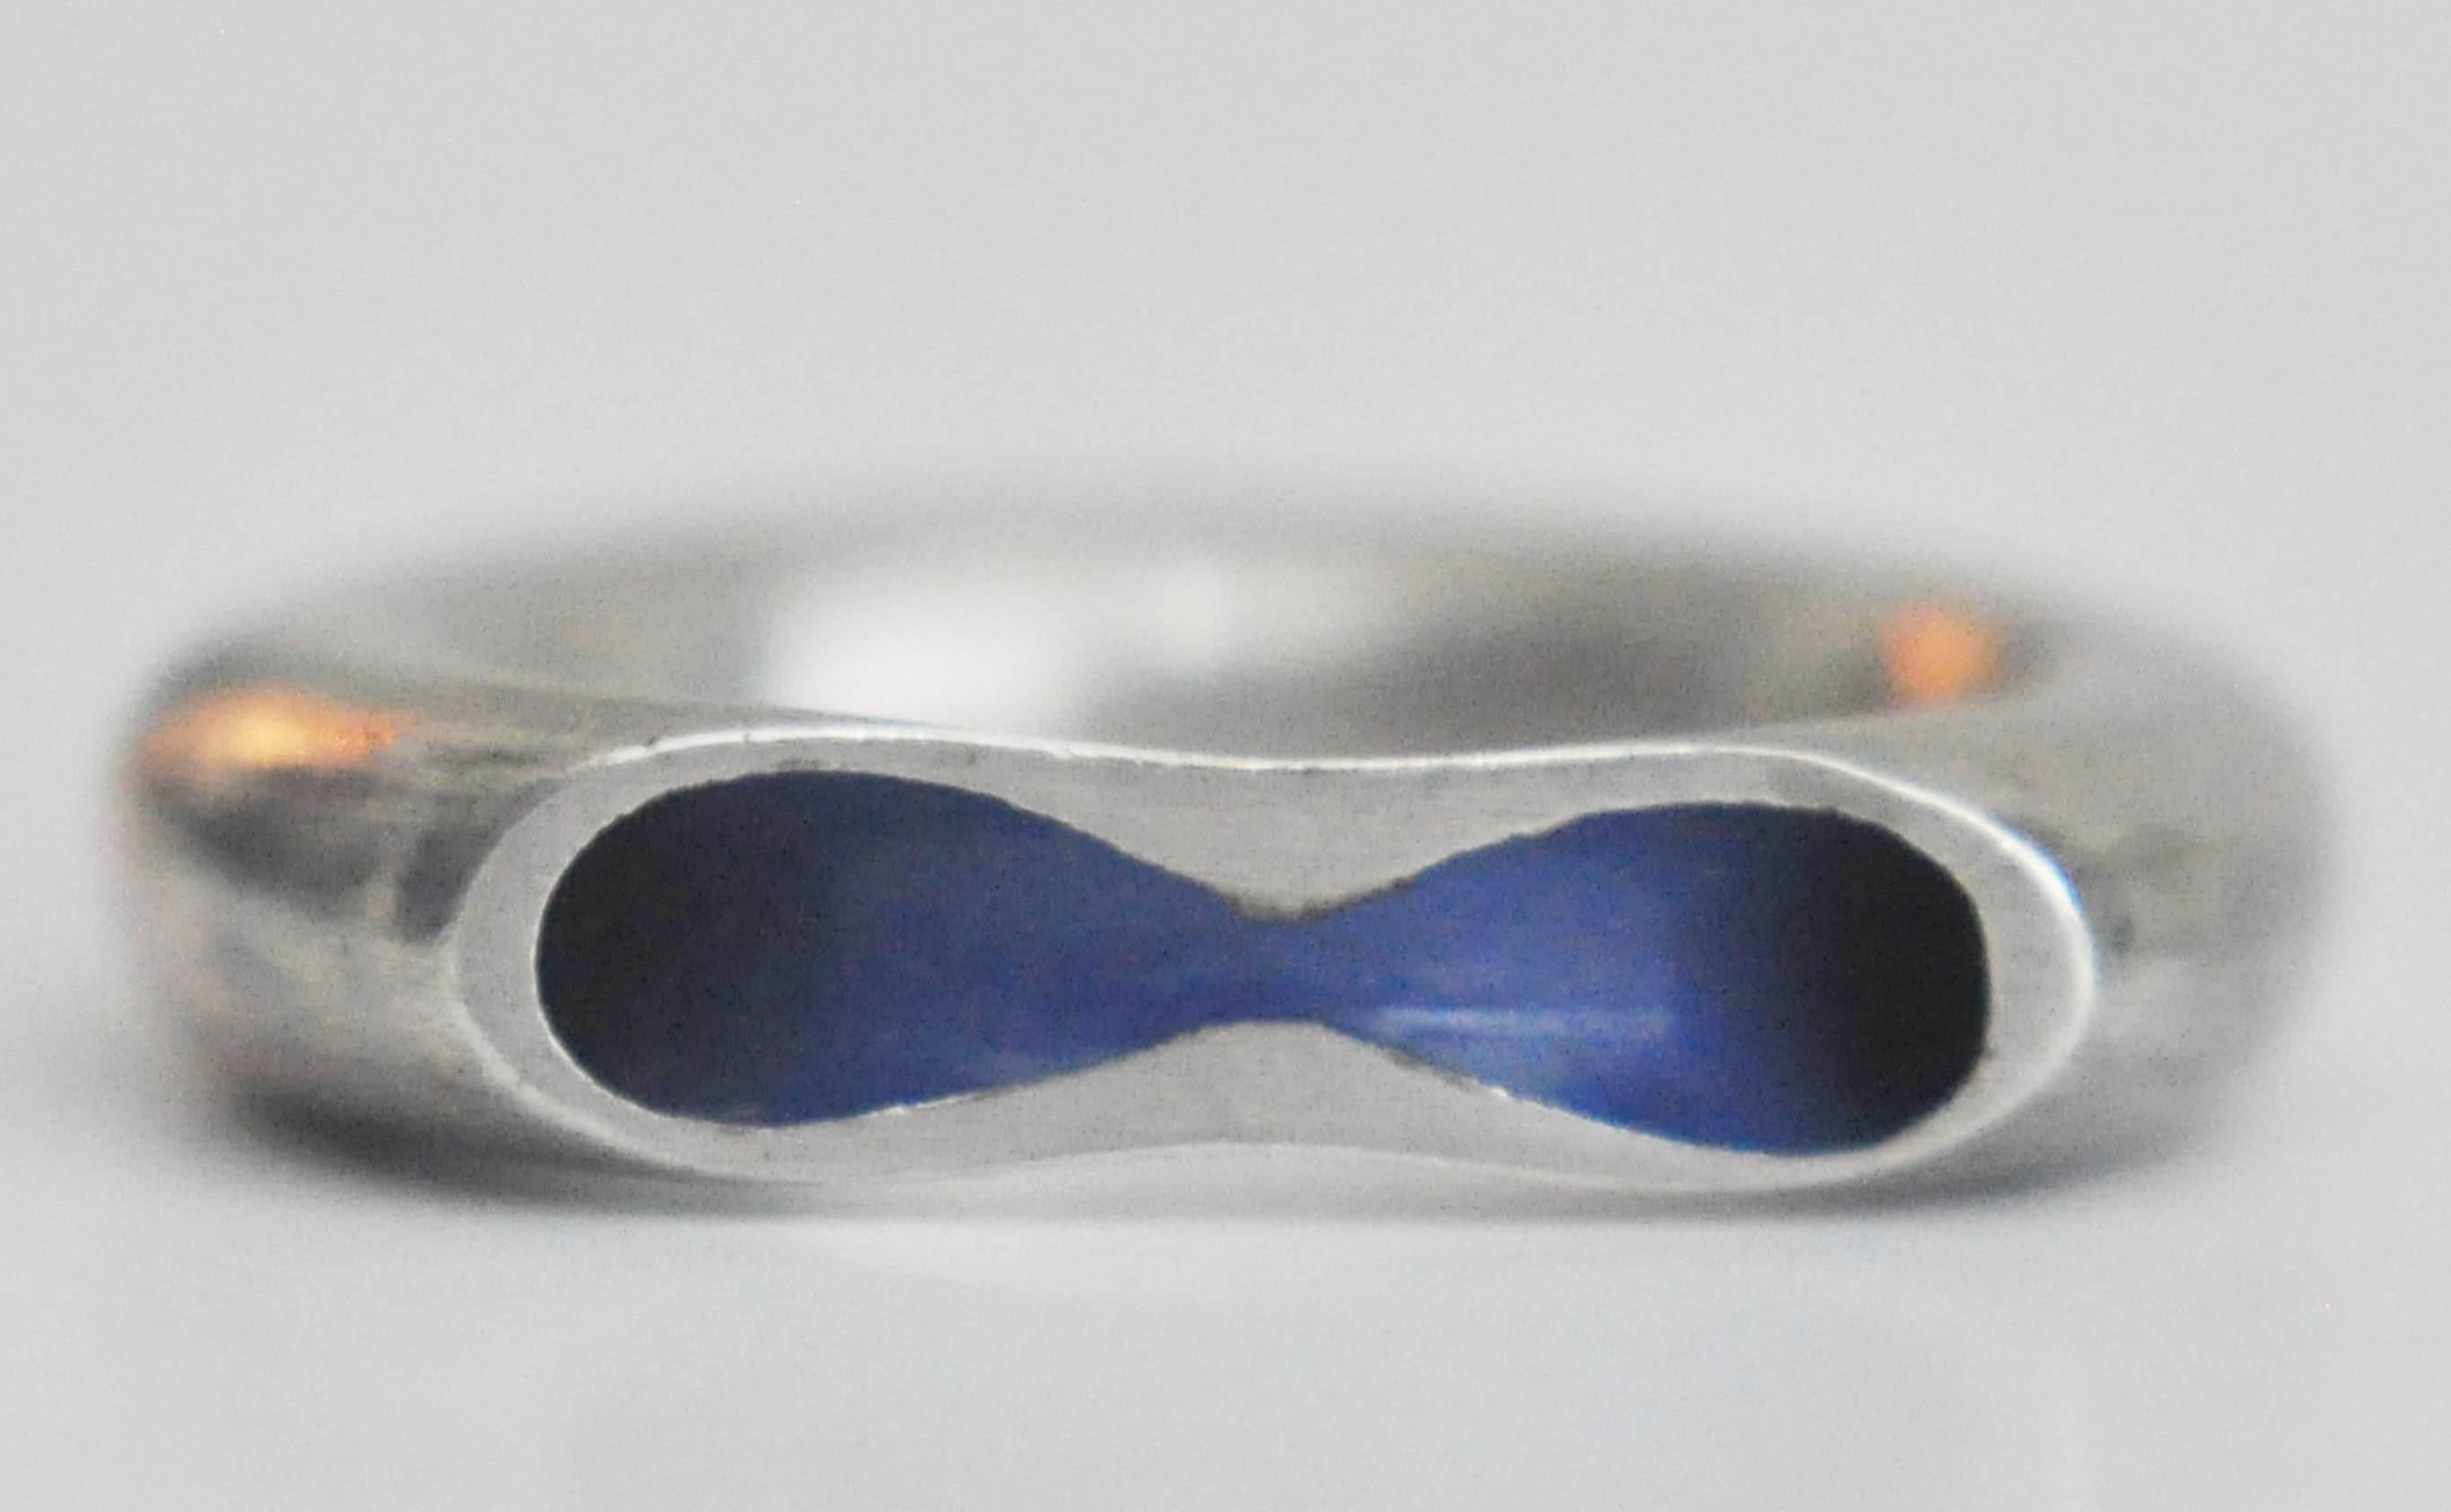 A brilliantly designed ring by the influential designer Marc Newson for the Dutch company Chi ha paura (chp. . .?)  The innovative design is a slice of a hollow silver tube revealing a blue enameled interior. Unmarked.  

Ring size:  7

